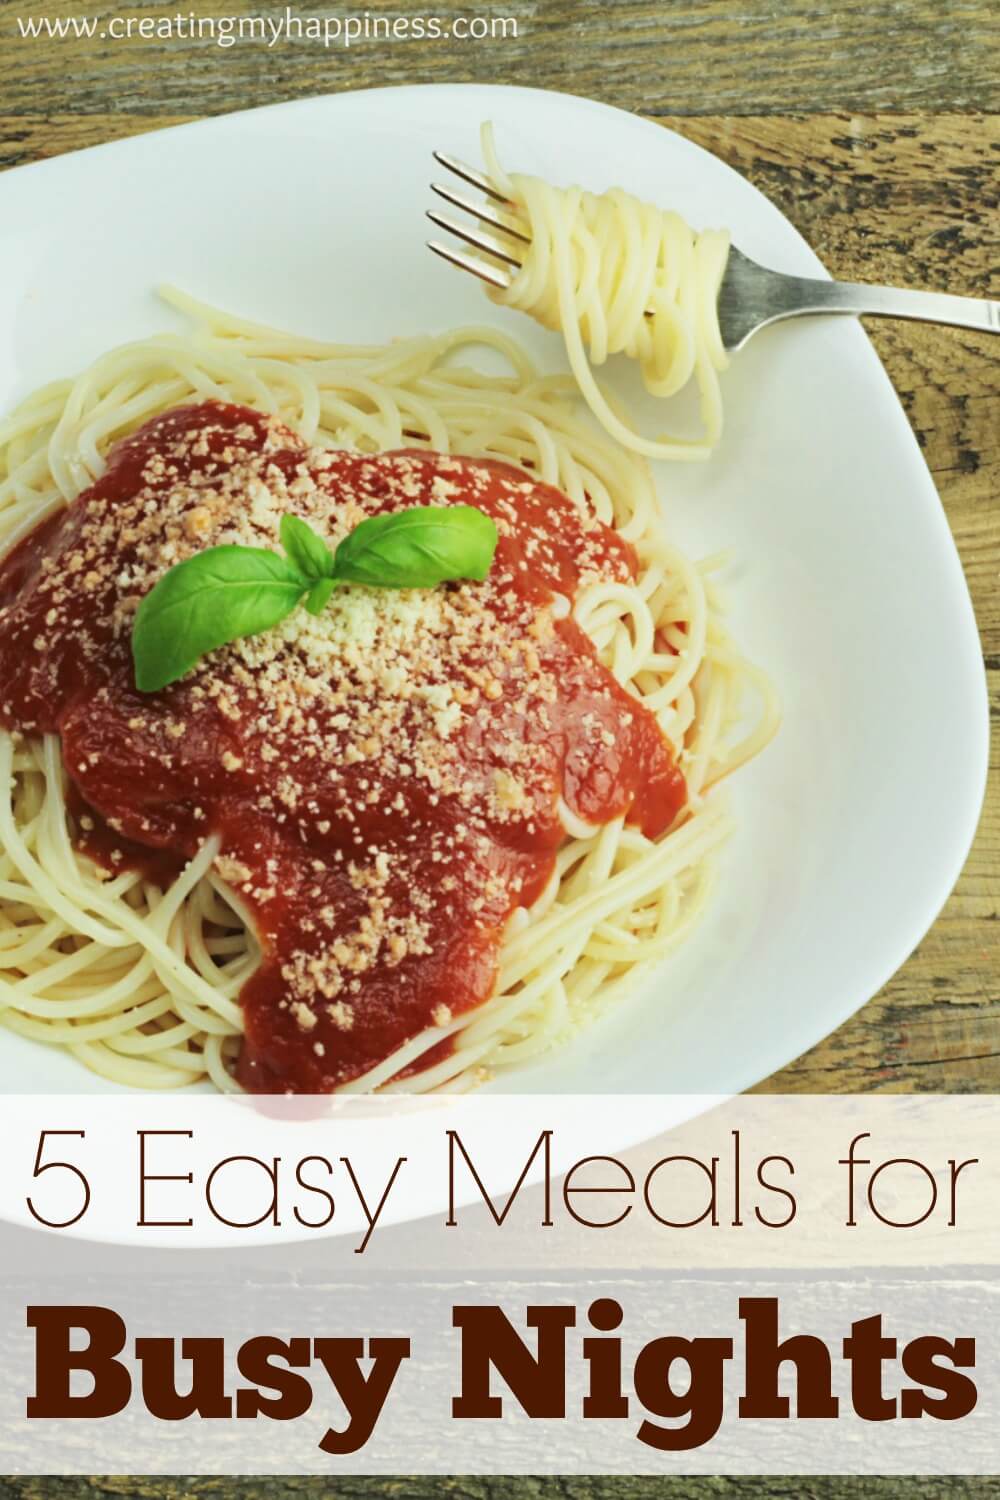 If you need food fast, but don't want to resort to fast food, here are 5 great meals you can whip up in no time that will satisfy even the whole family.